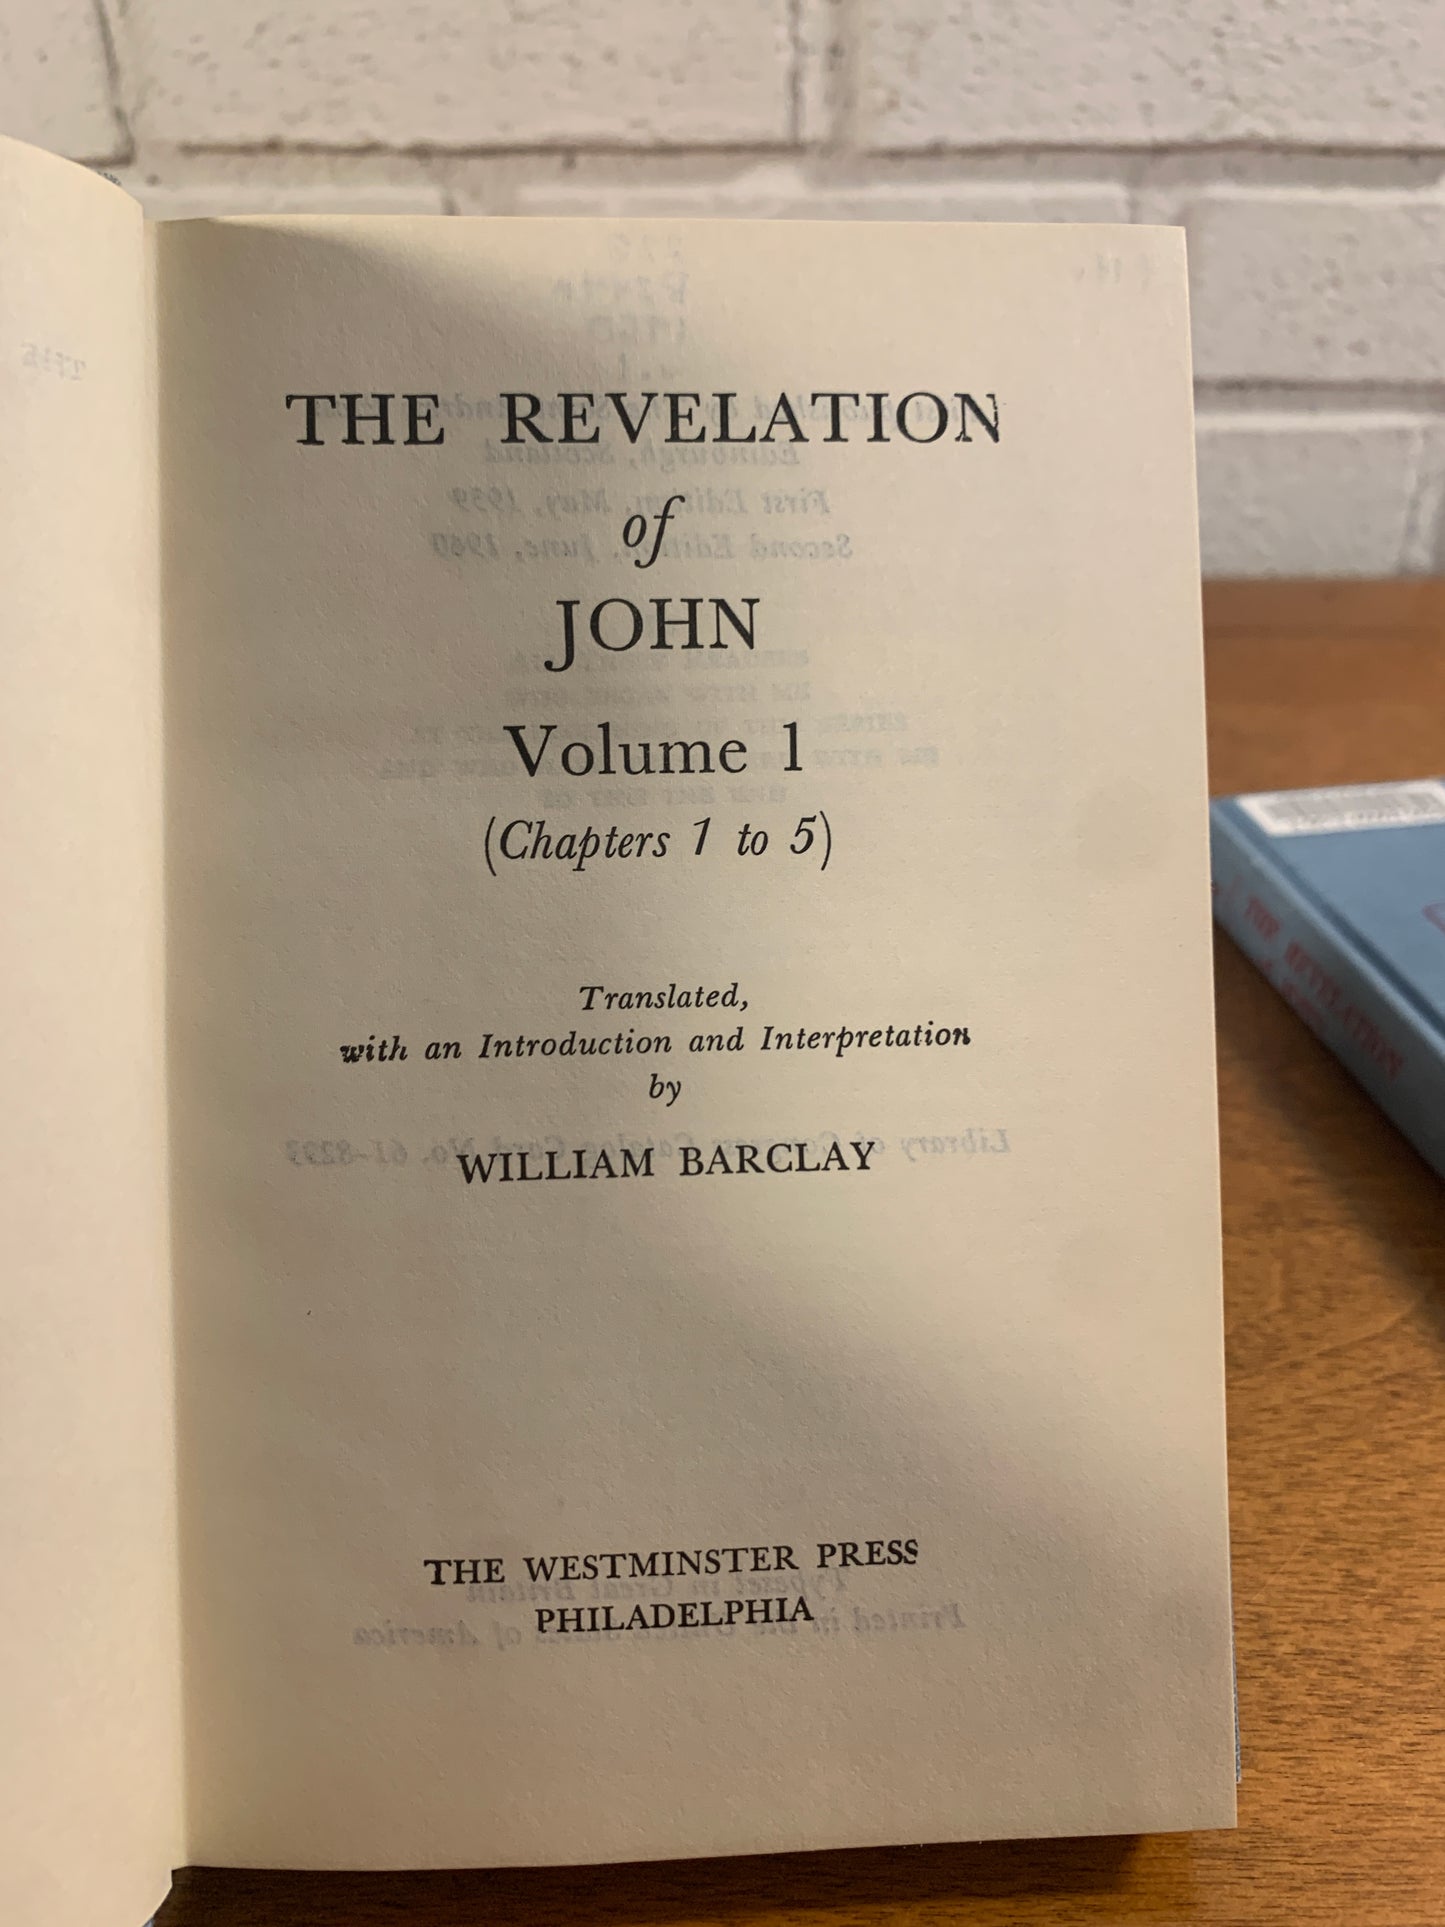 The Daily Study Bible, The Revelation of John Vol 1 & 2, (All Chapters)